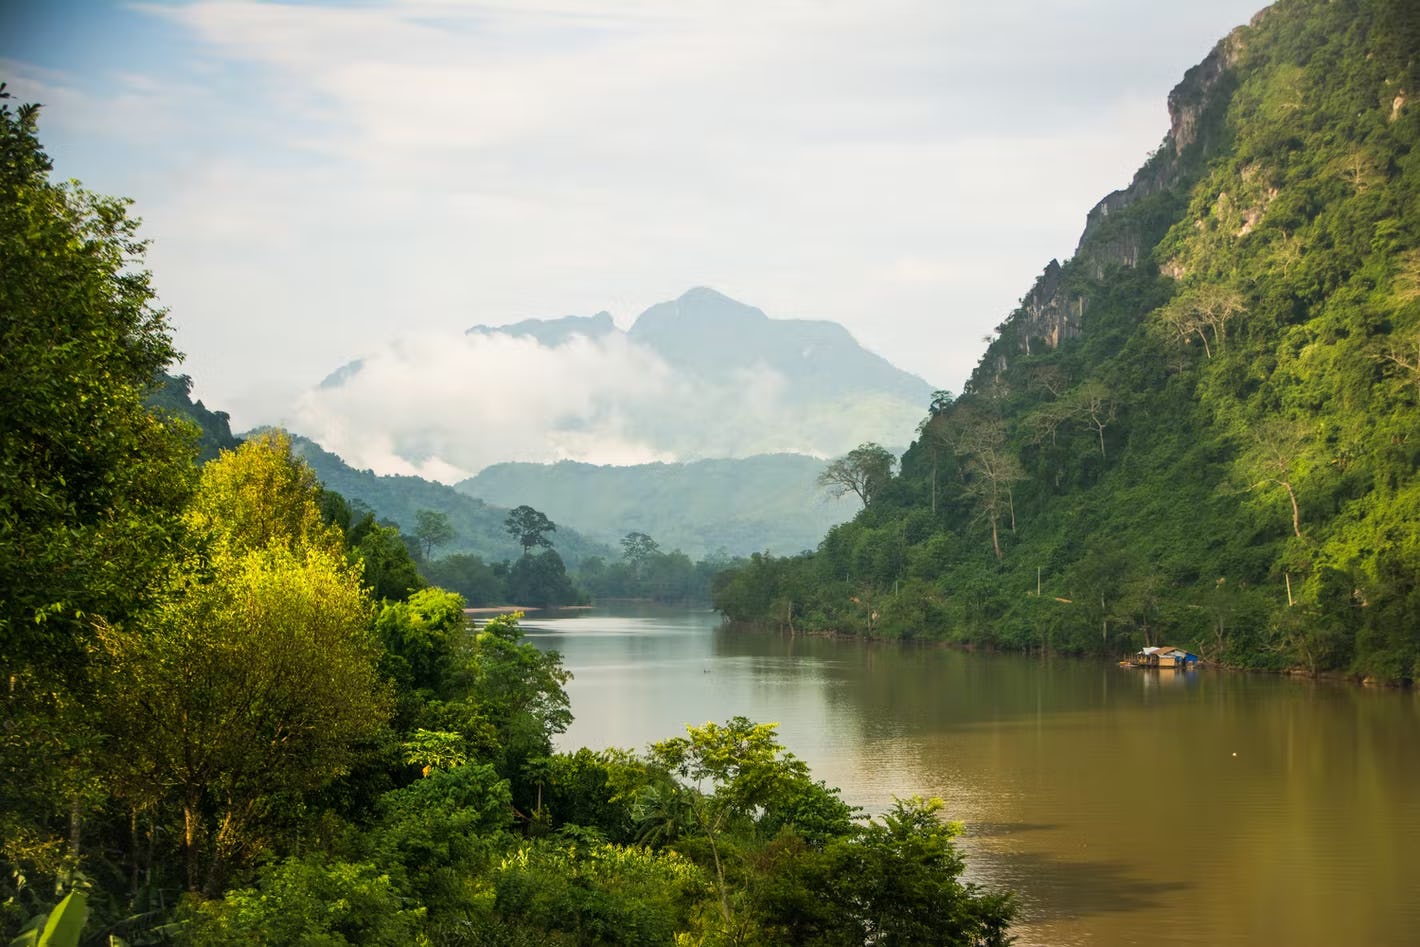 Laos country guide